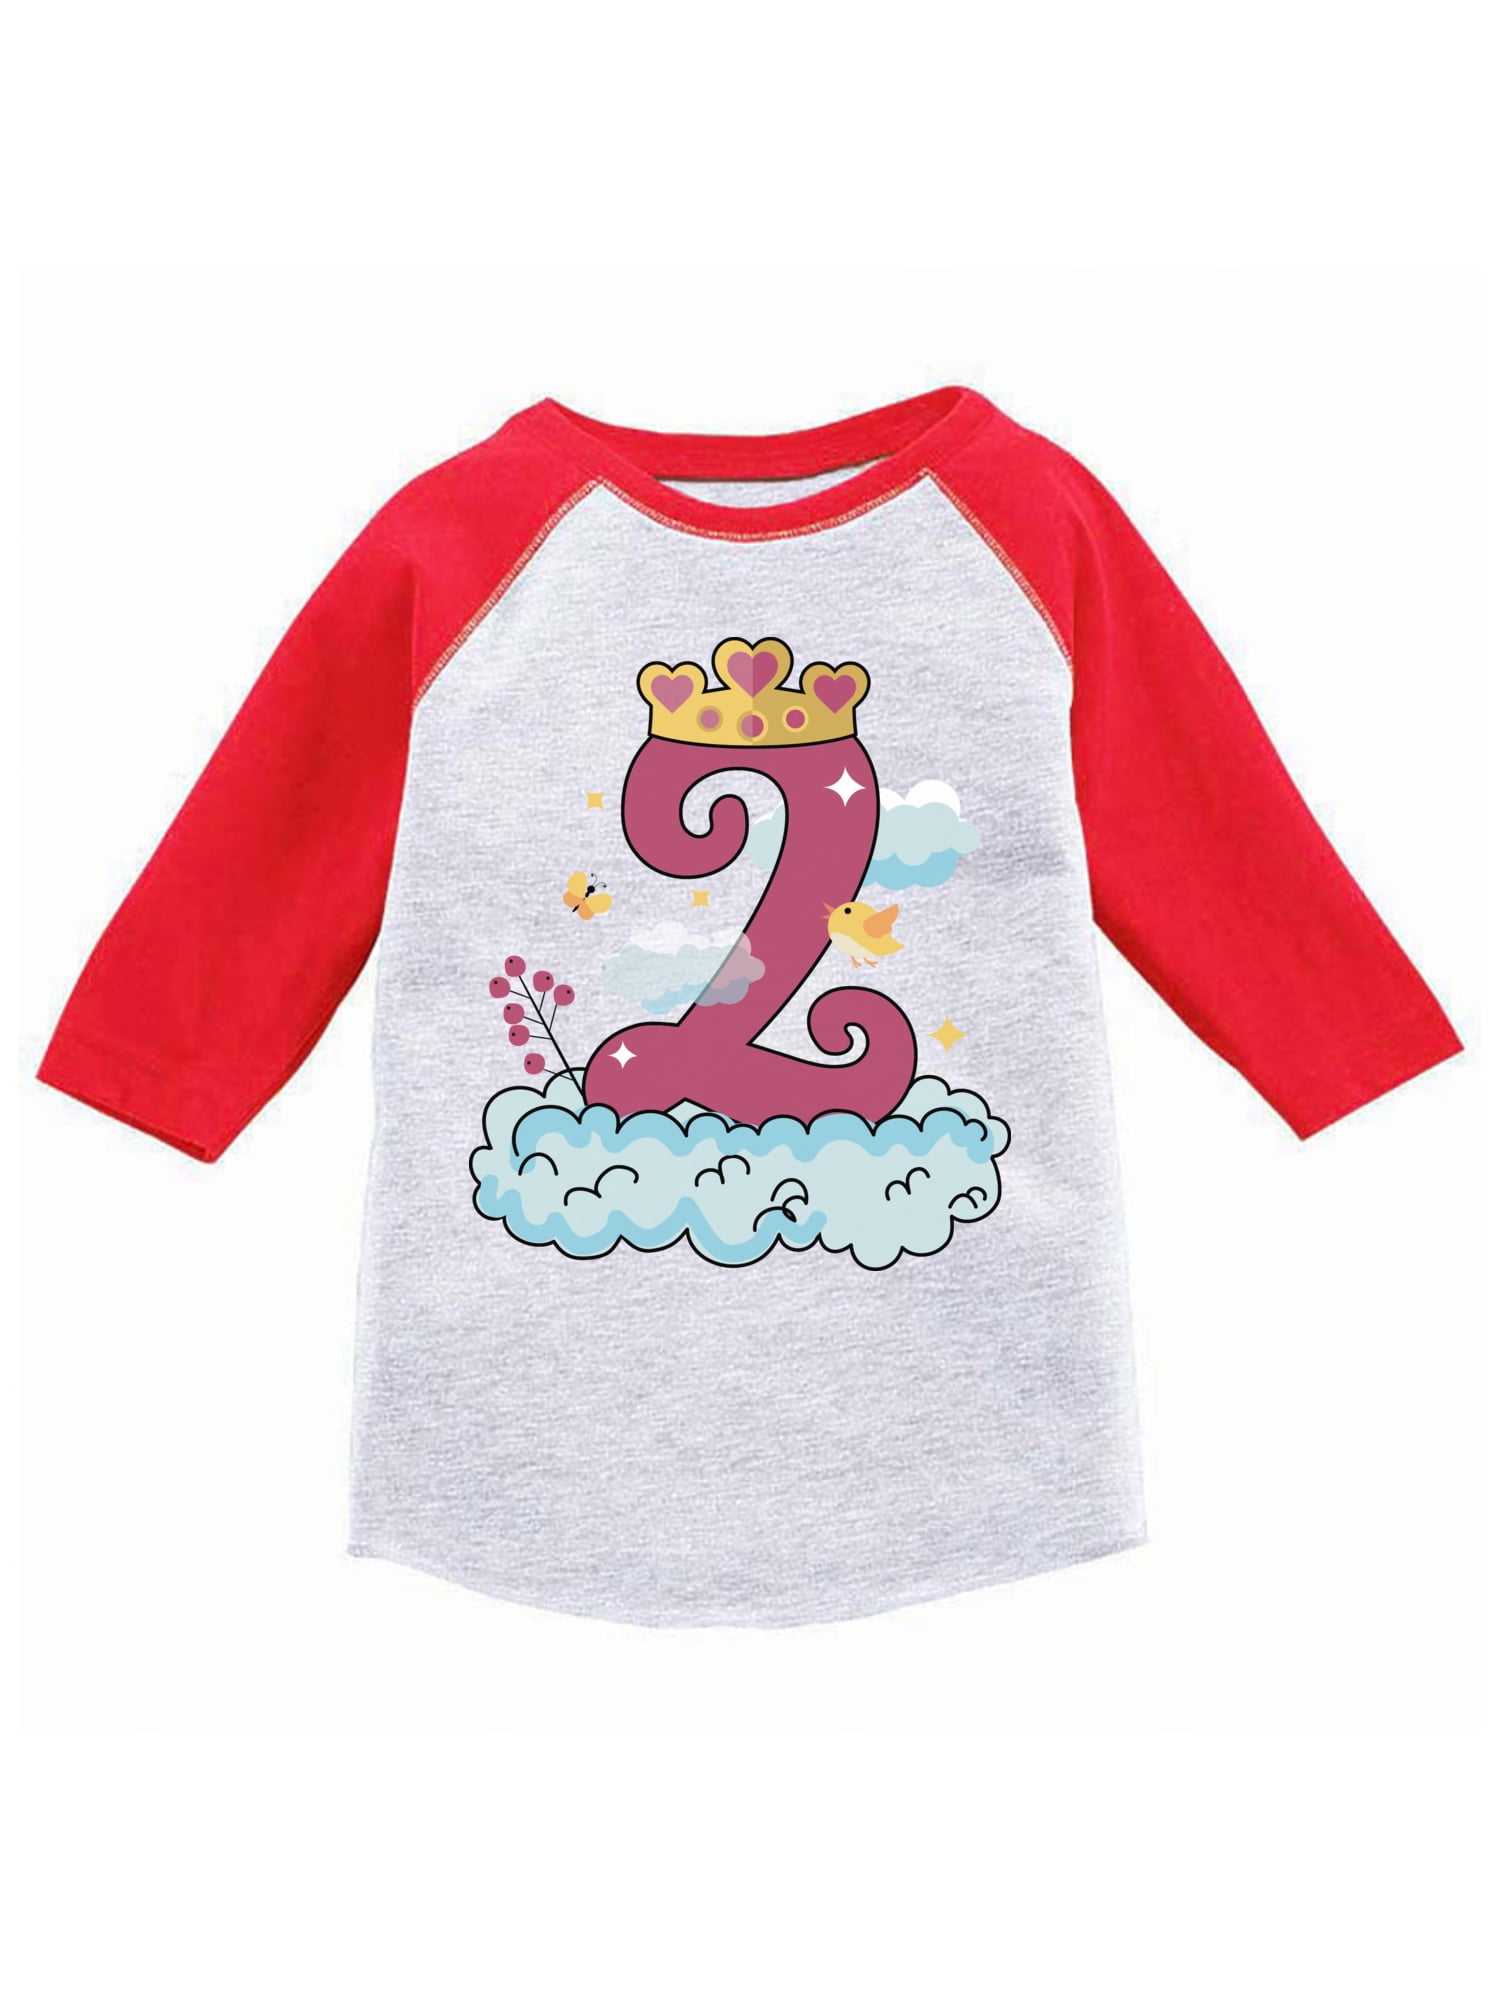 princess gifts for 2 year olds